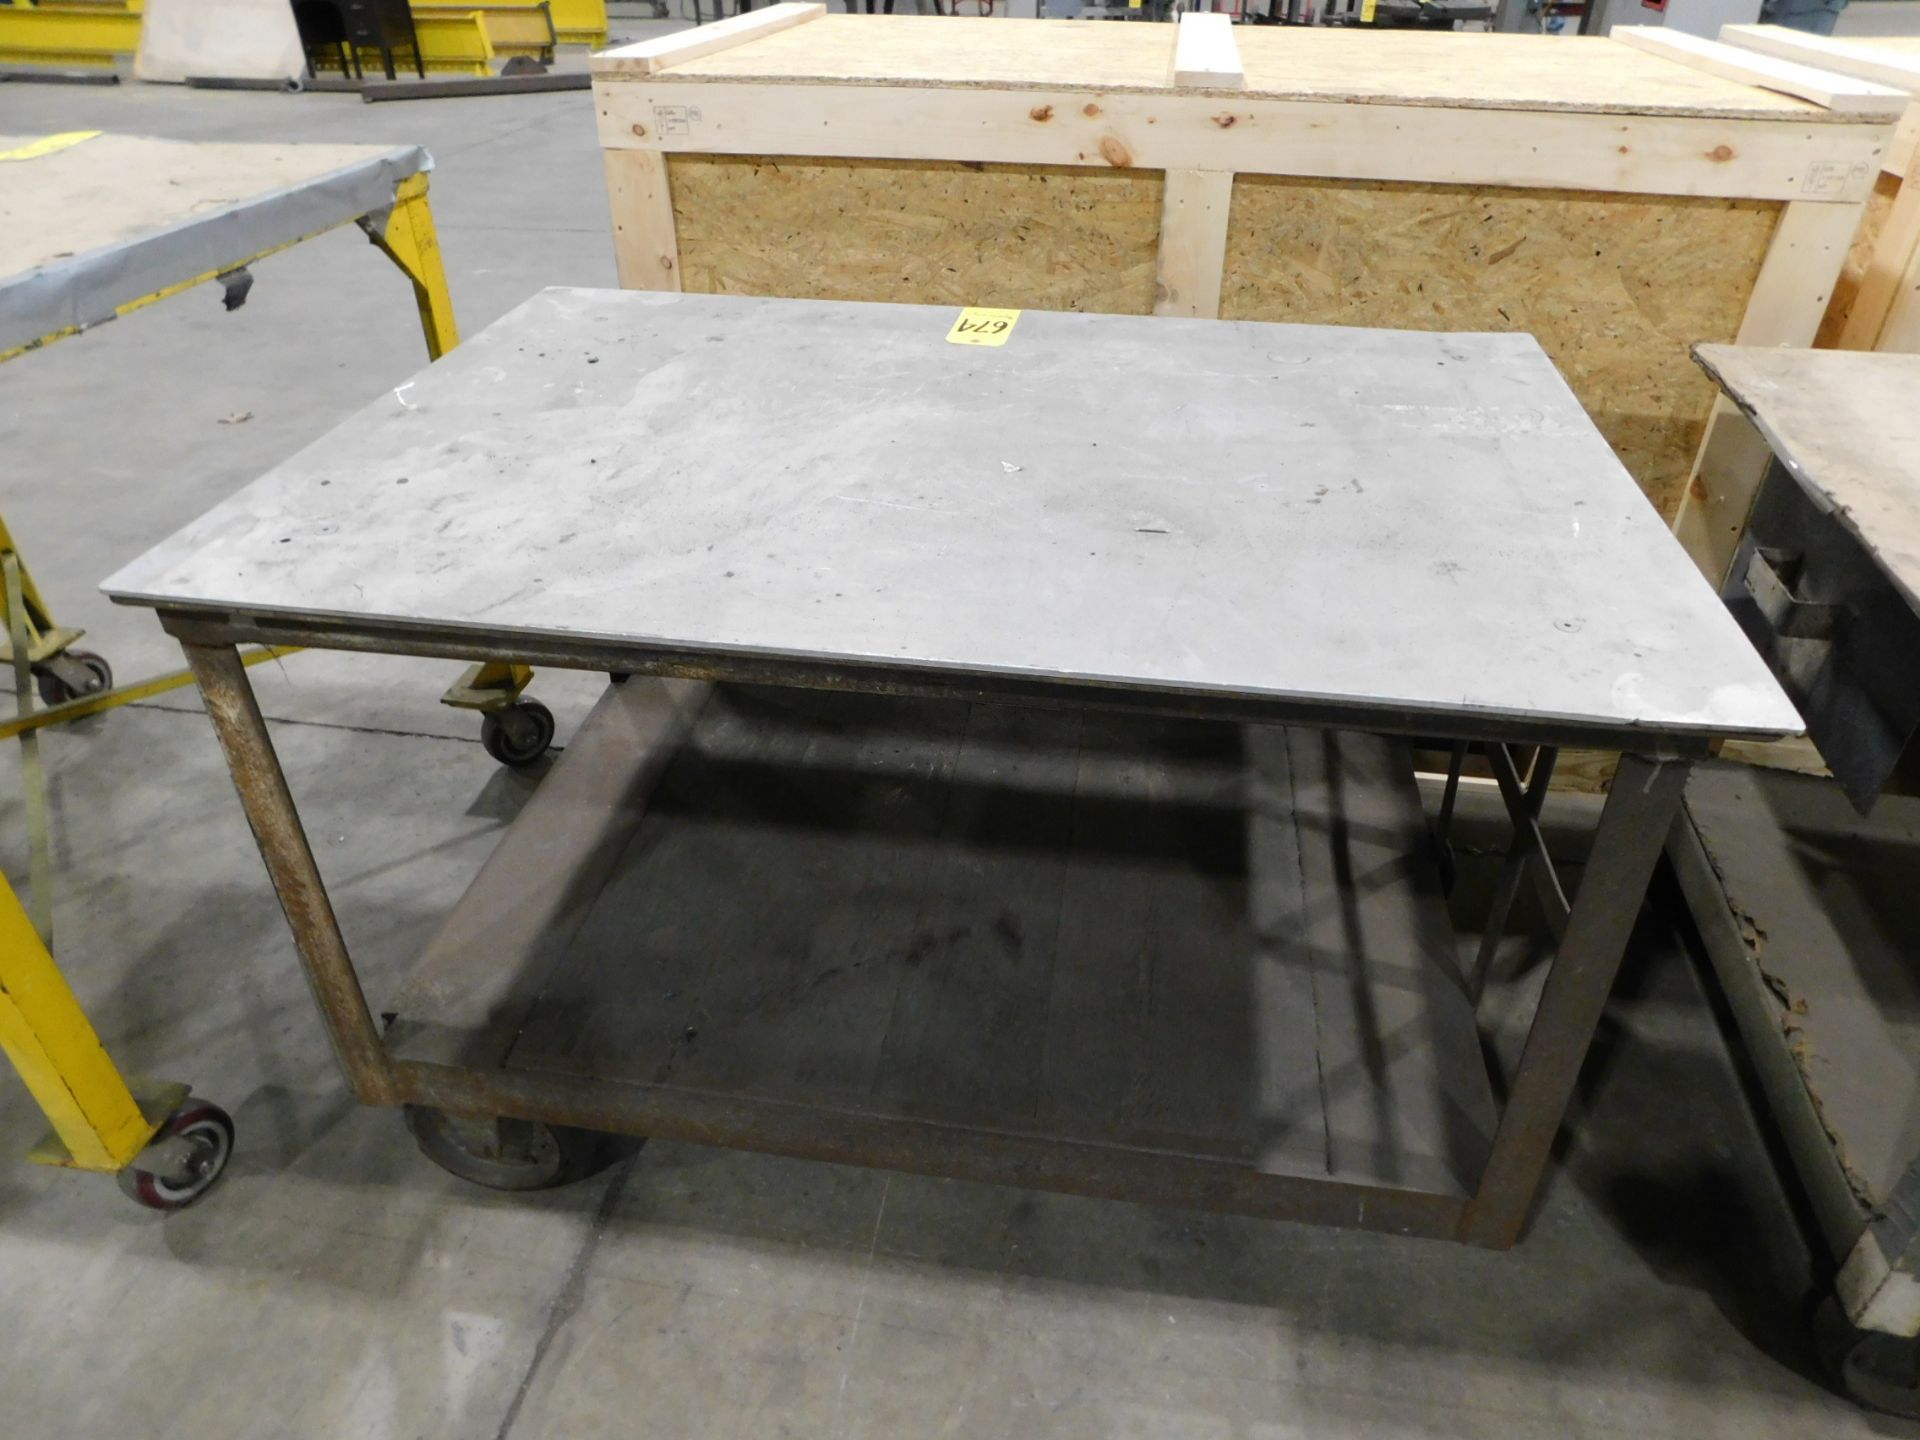 Shop Table on Casters, 34" X 51" X 32" High